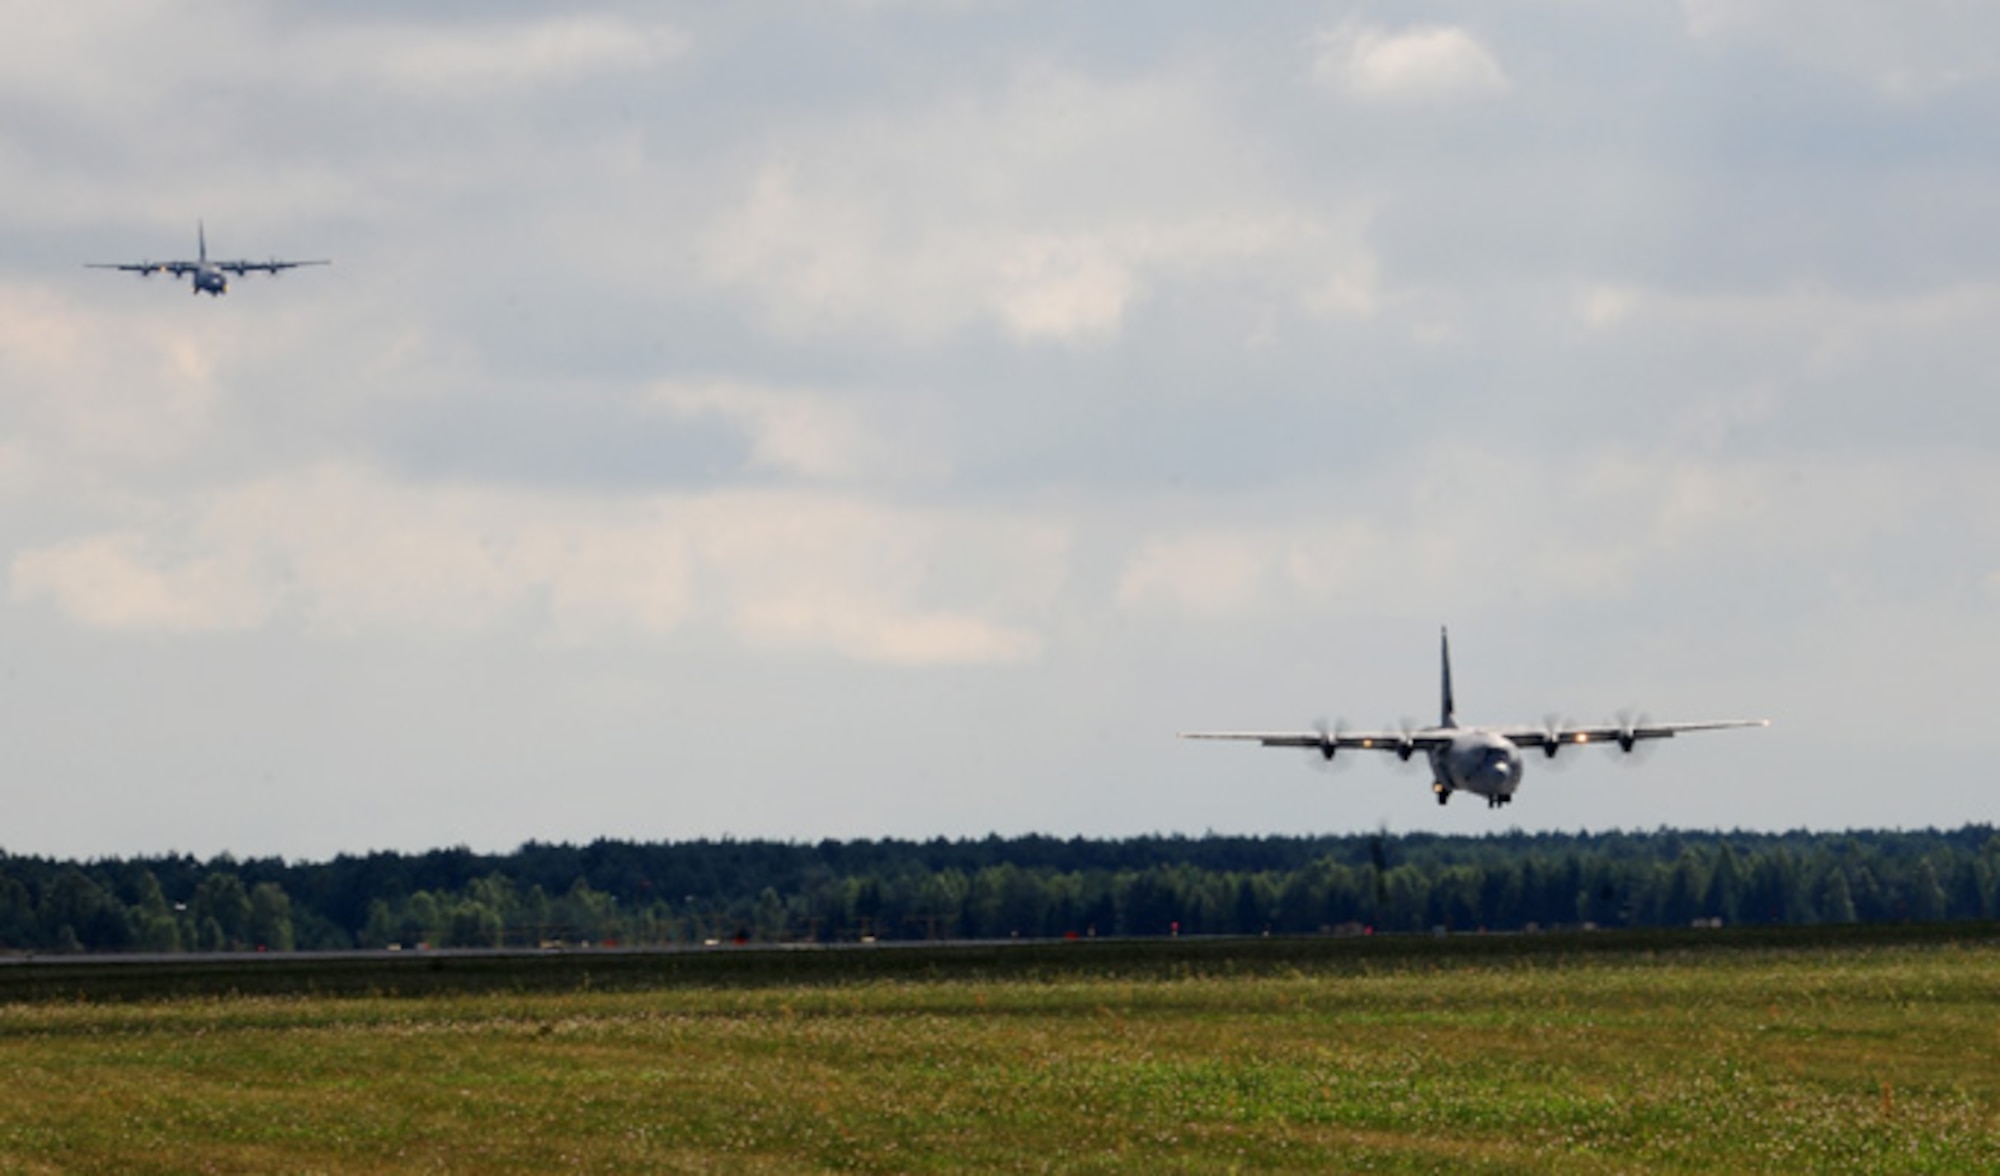 Two C-130J Super Hercules come in for a landing Aug. 14, 2014, at Powidz Air Base, Poland. The aircraft, deployed from Ramstein Air Base, Germany, are part of a training deployment in support of Operation Atlantic Resolve. (U.S. Air Force photo/Staff Sgt. Jarad A. Denton)